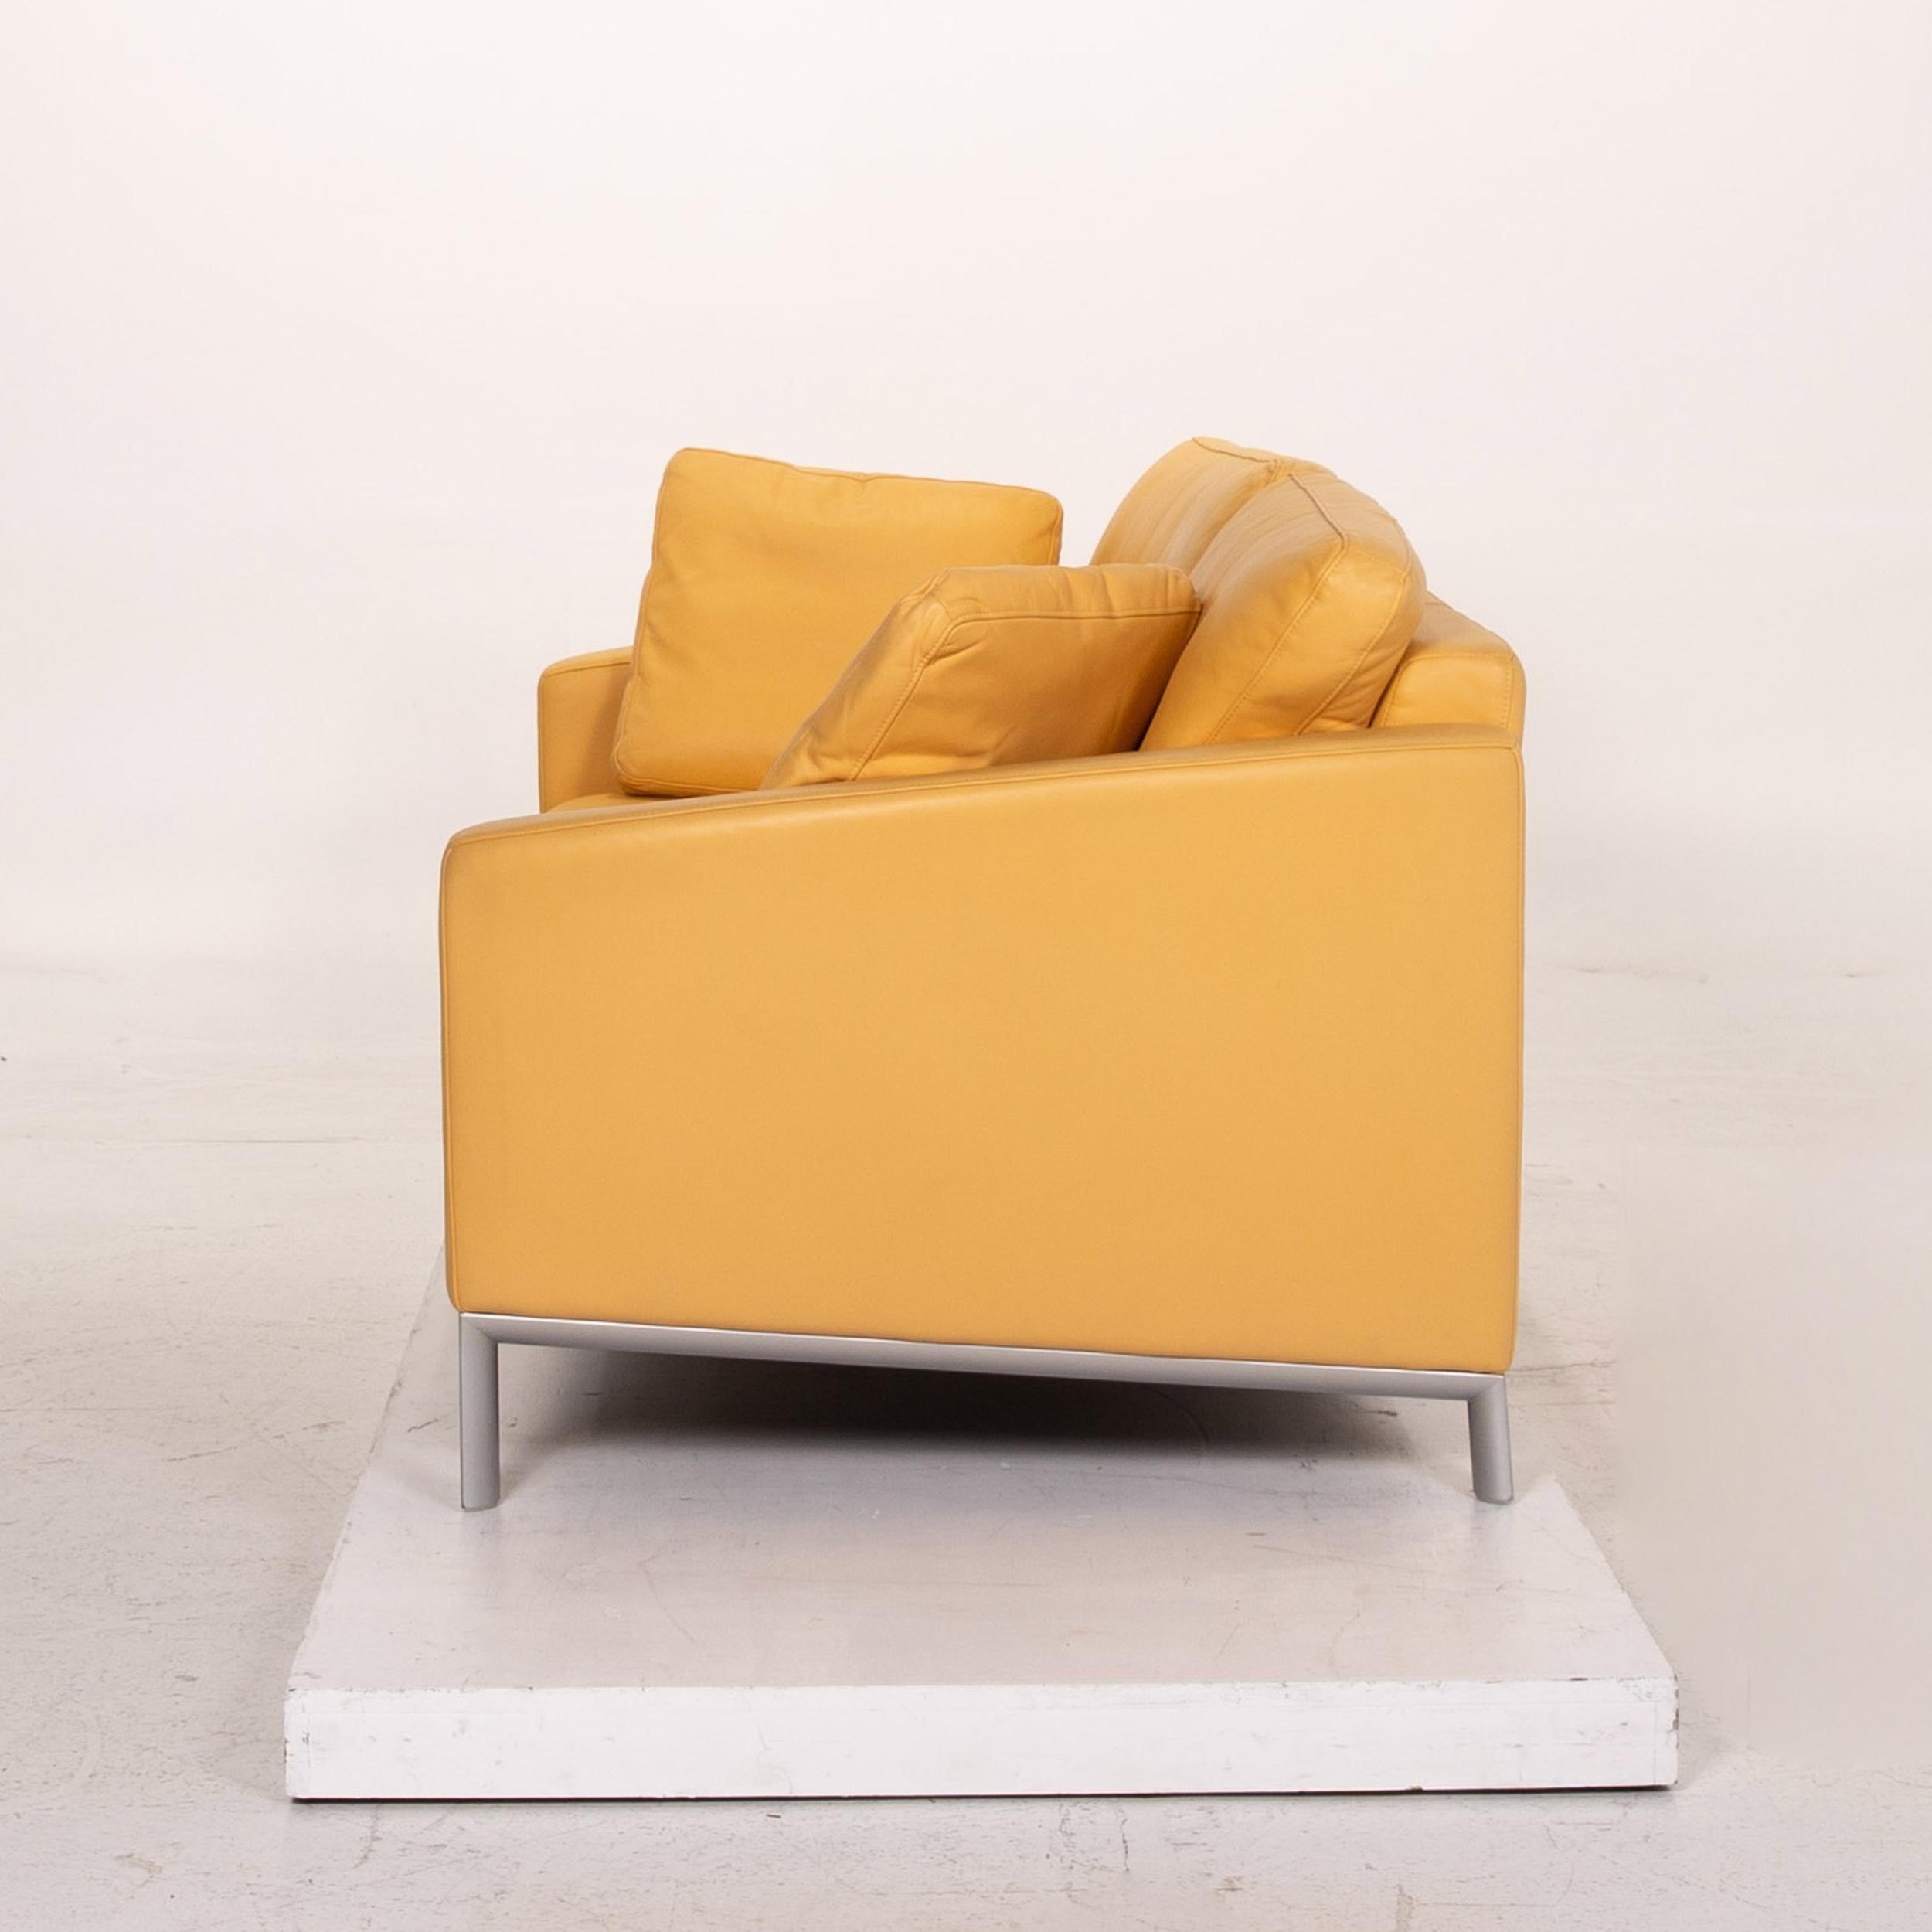 Rolf Benz Leather Sofa Yellow Two-Seat Couch For Sale 2